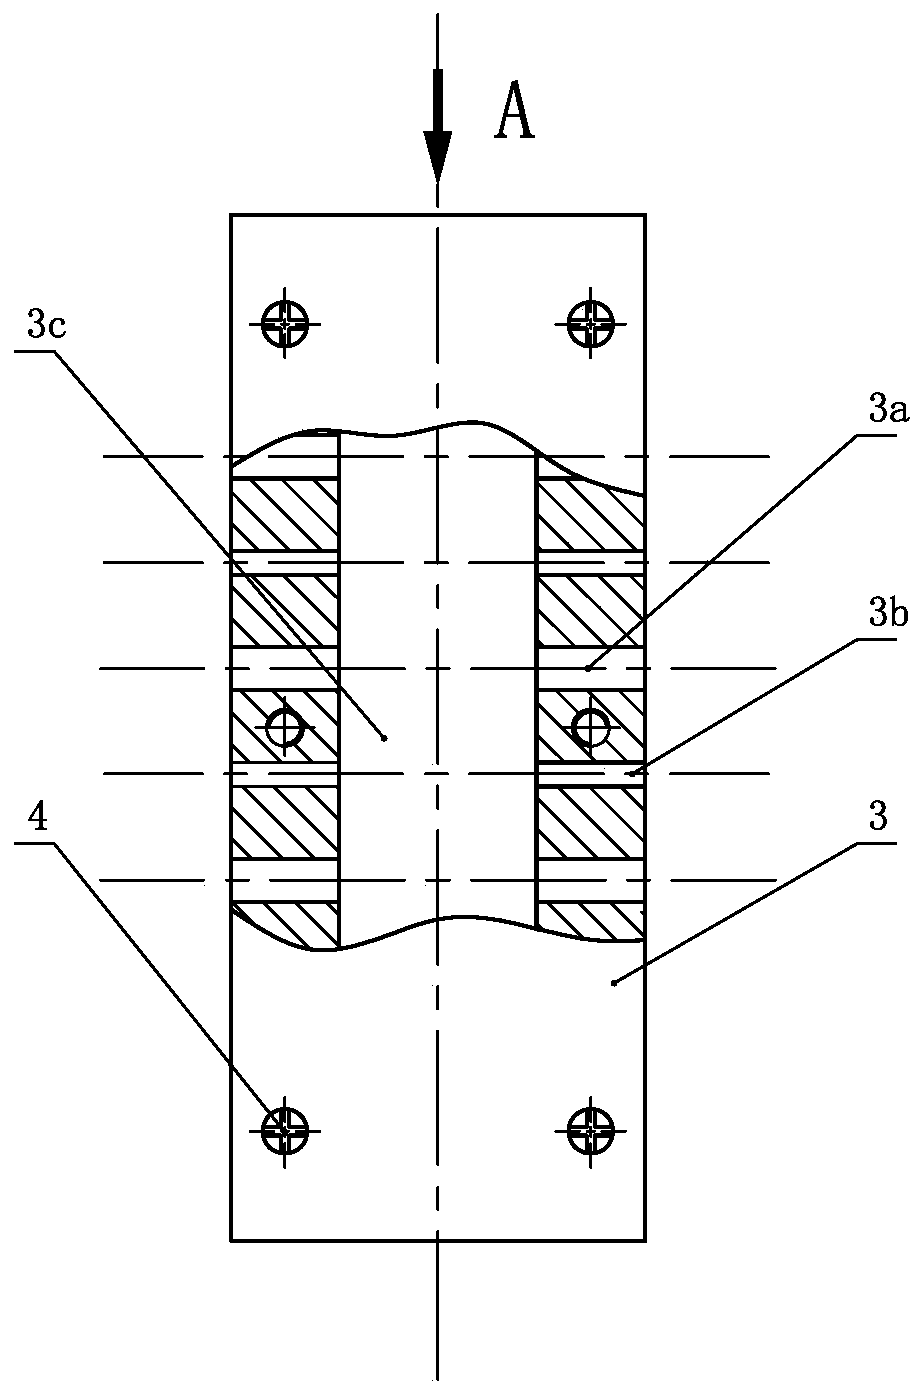 A device and method for making needle point defects for cable testing